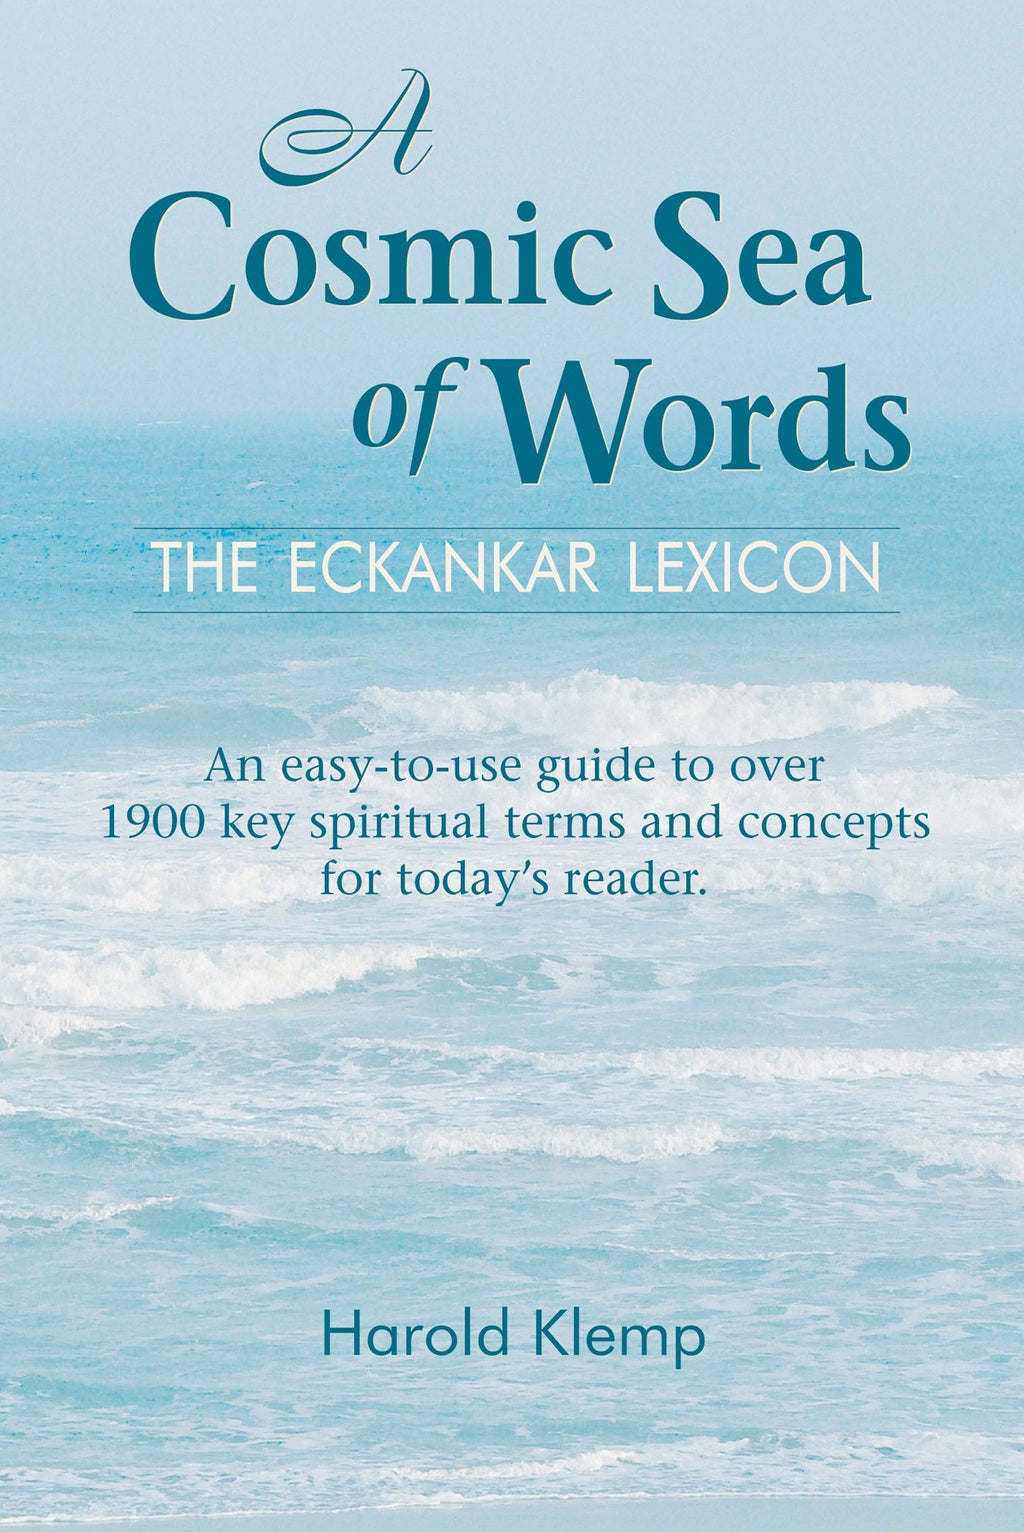 A cosmic sea of words: 1570432864